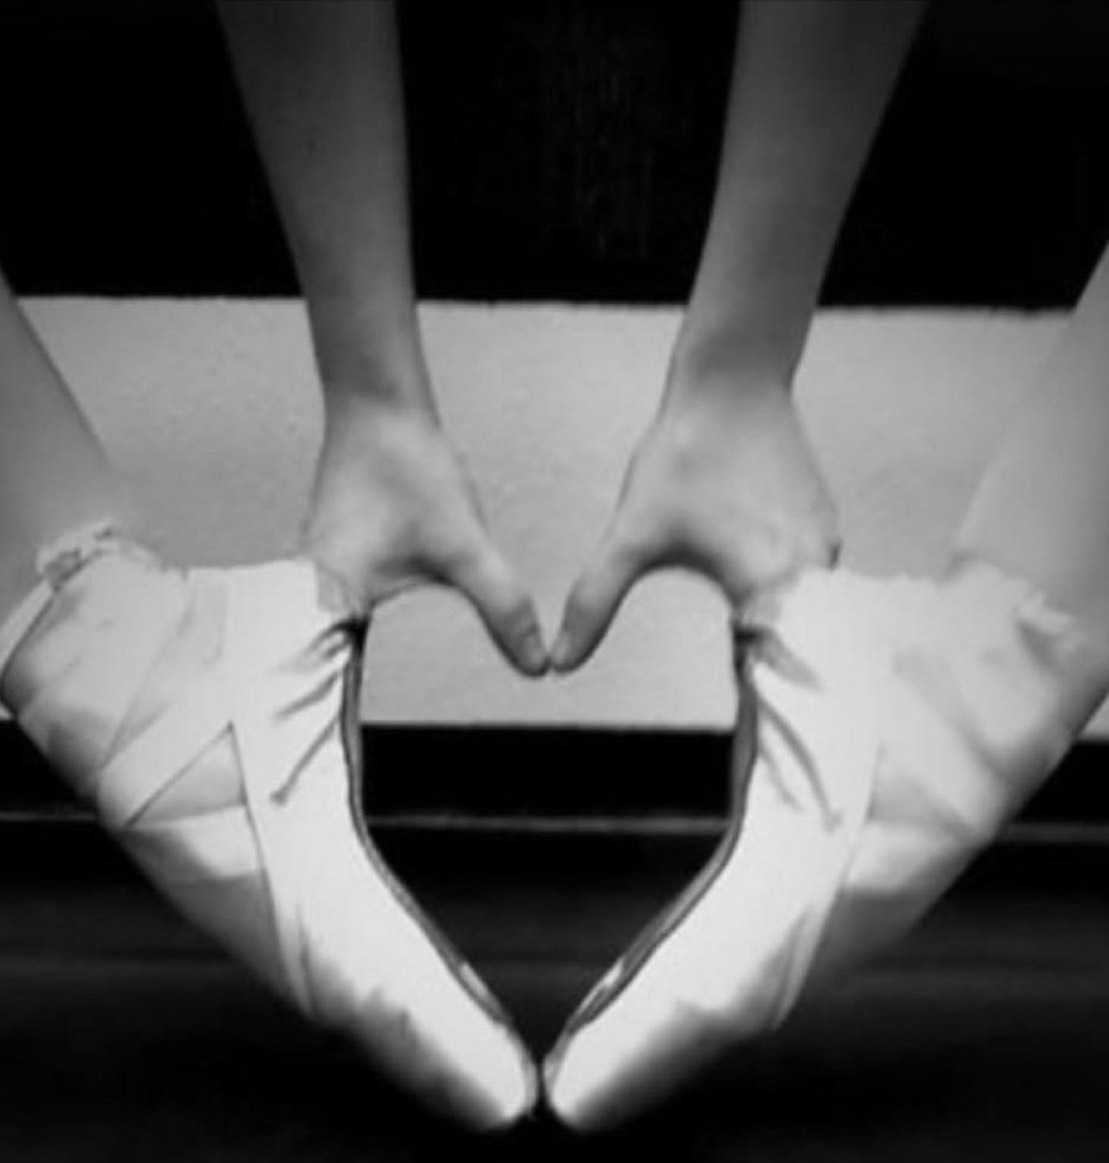 ballet shoes in the shape of a heart